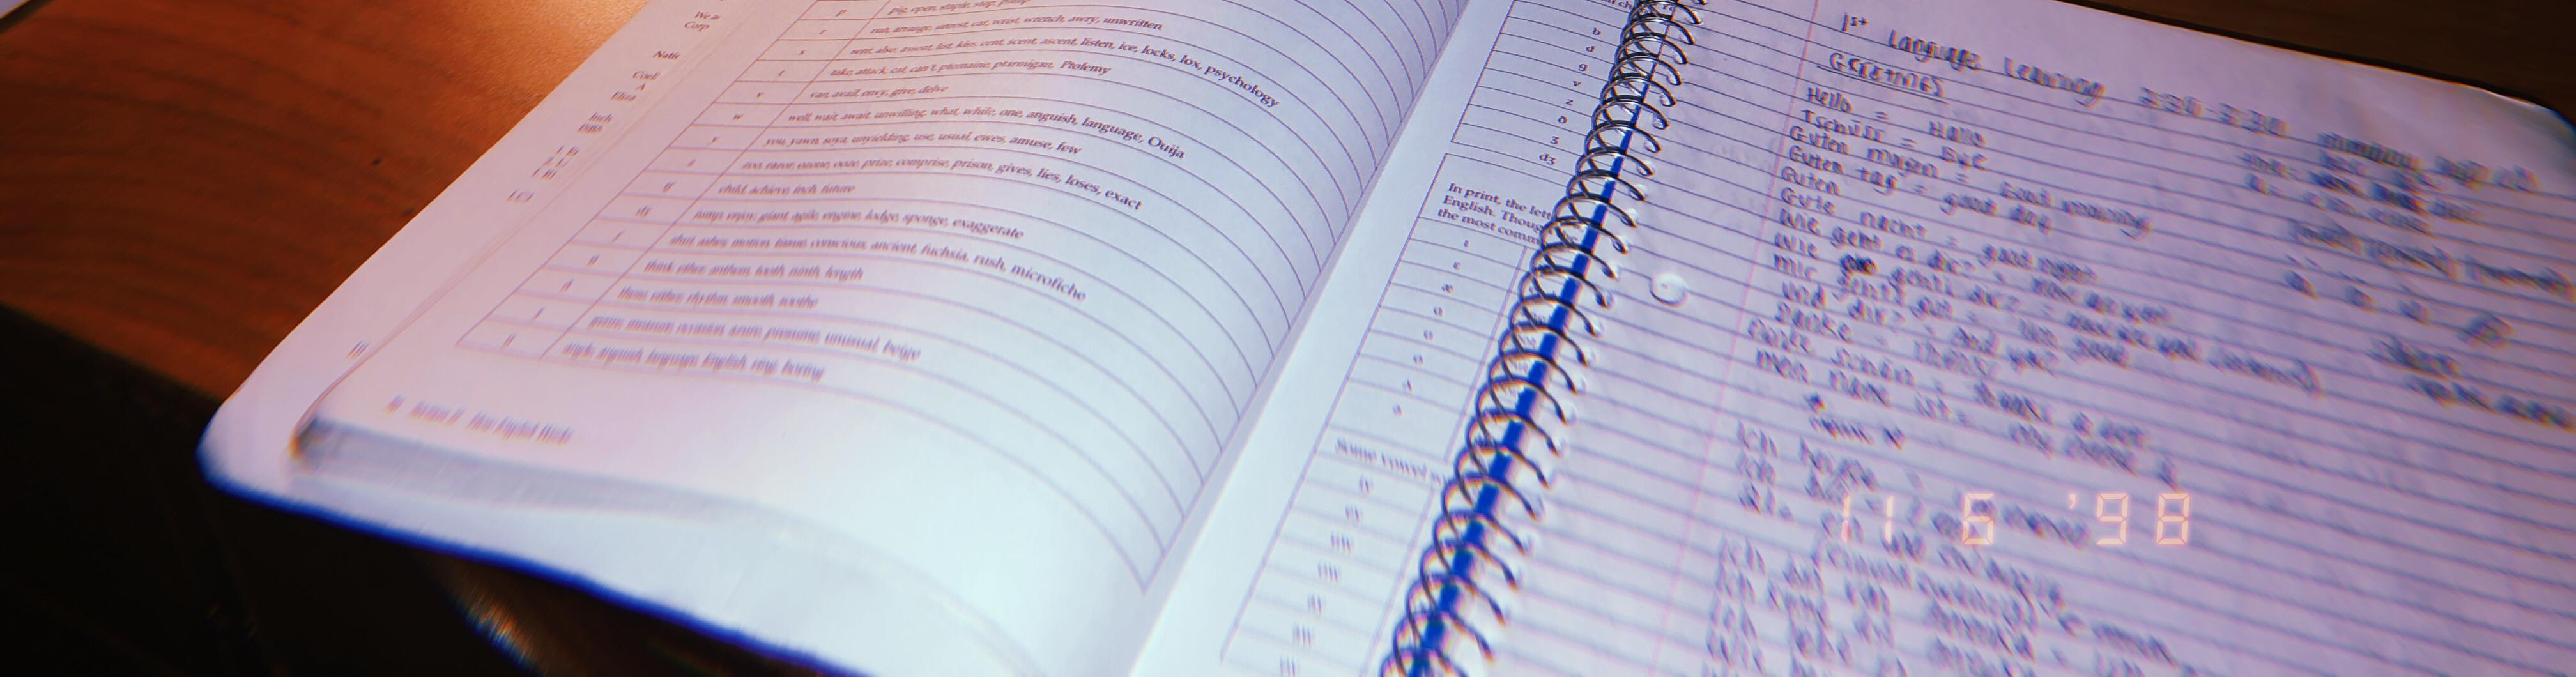 A blurry photo of a notebook on a textbook.